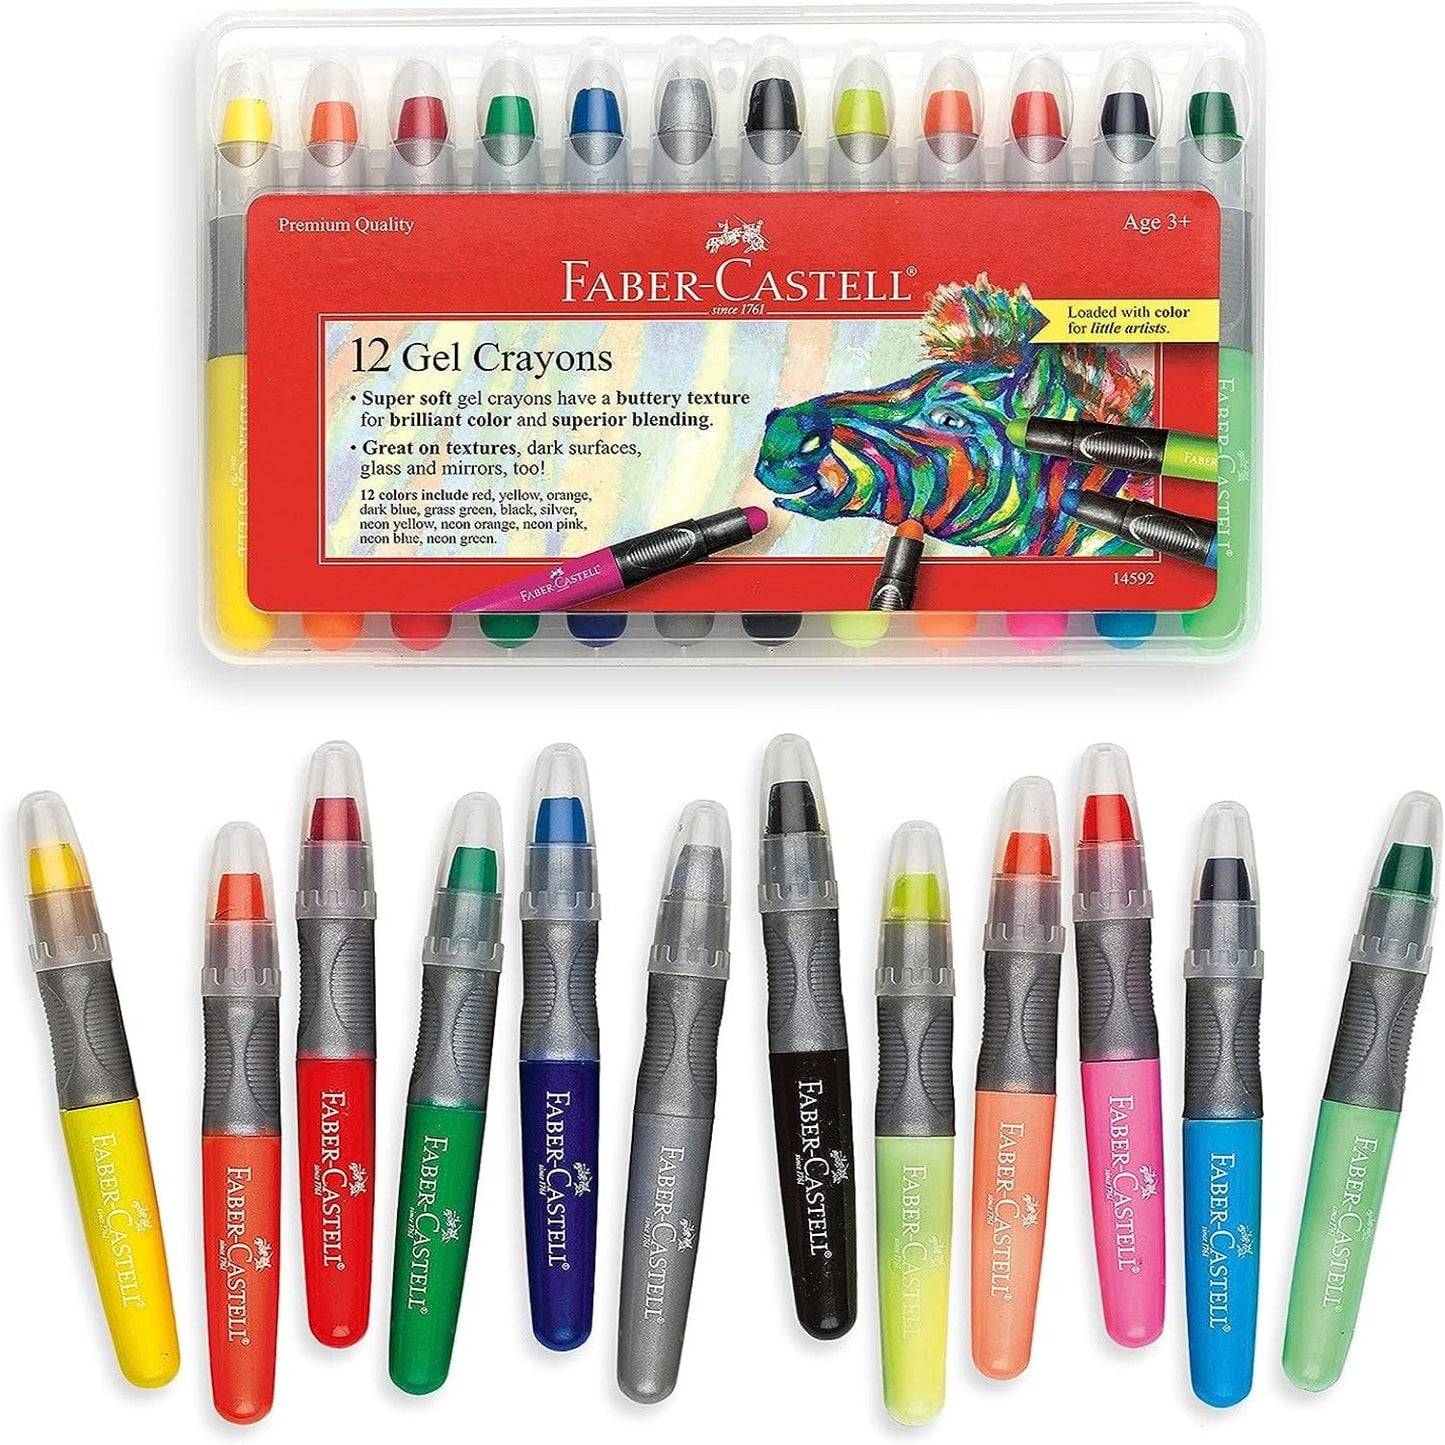 Faber-Castell Markers, Pens, Brushes & Crayons 12 Gel Crayons